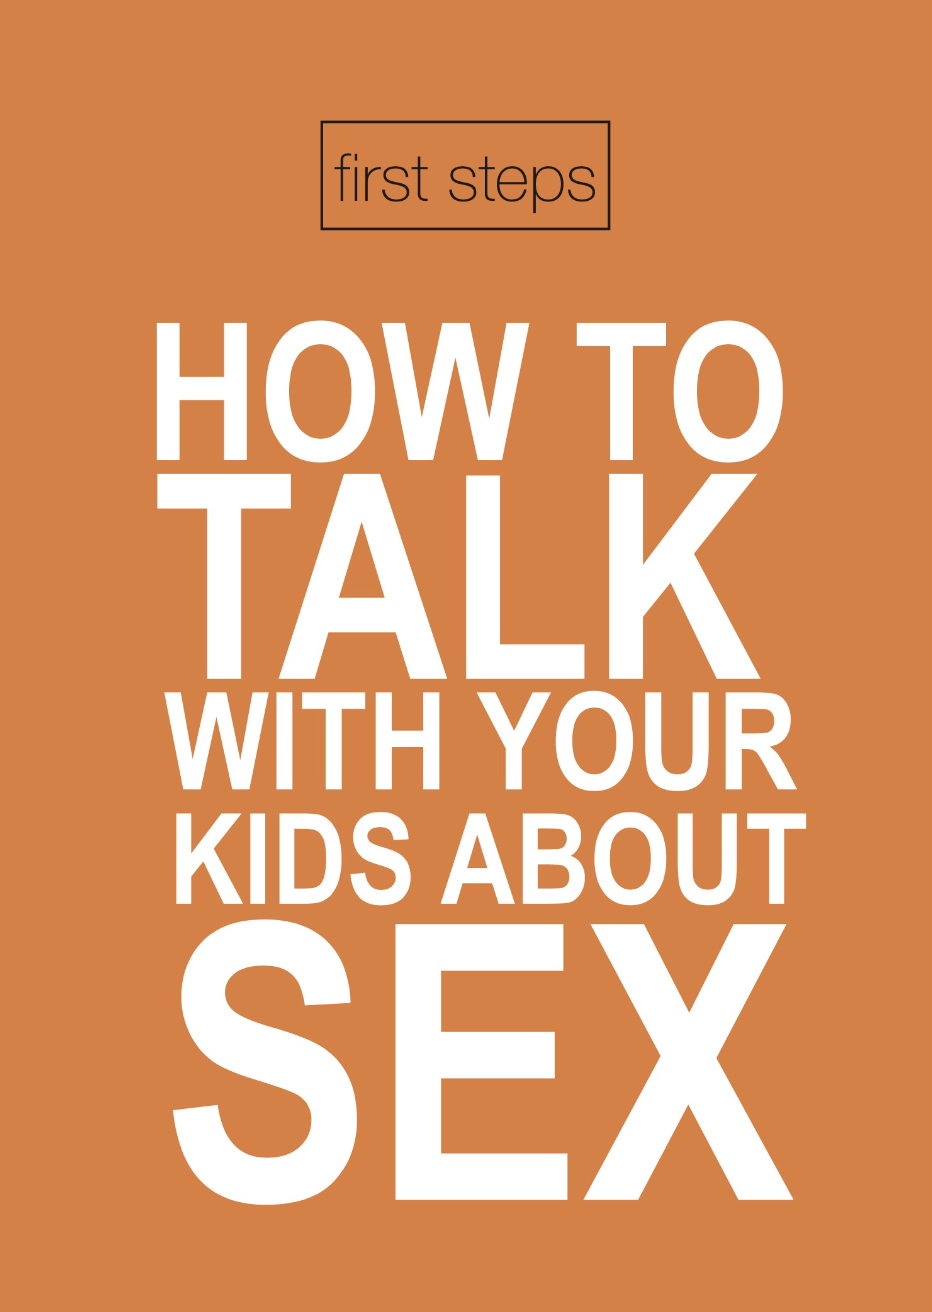 How To Talk With Your Kids About Sex